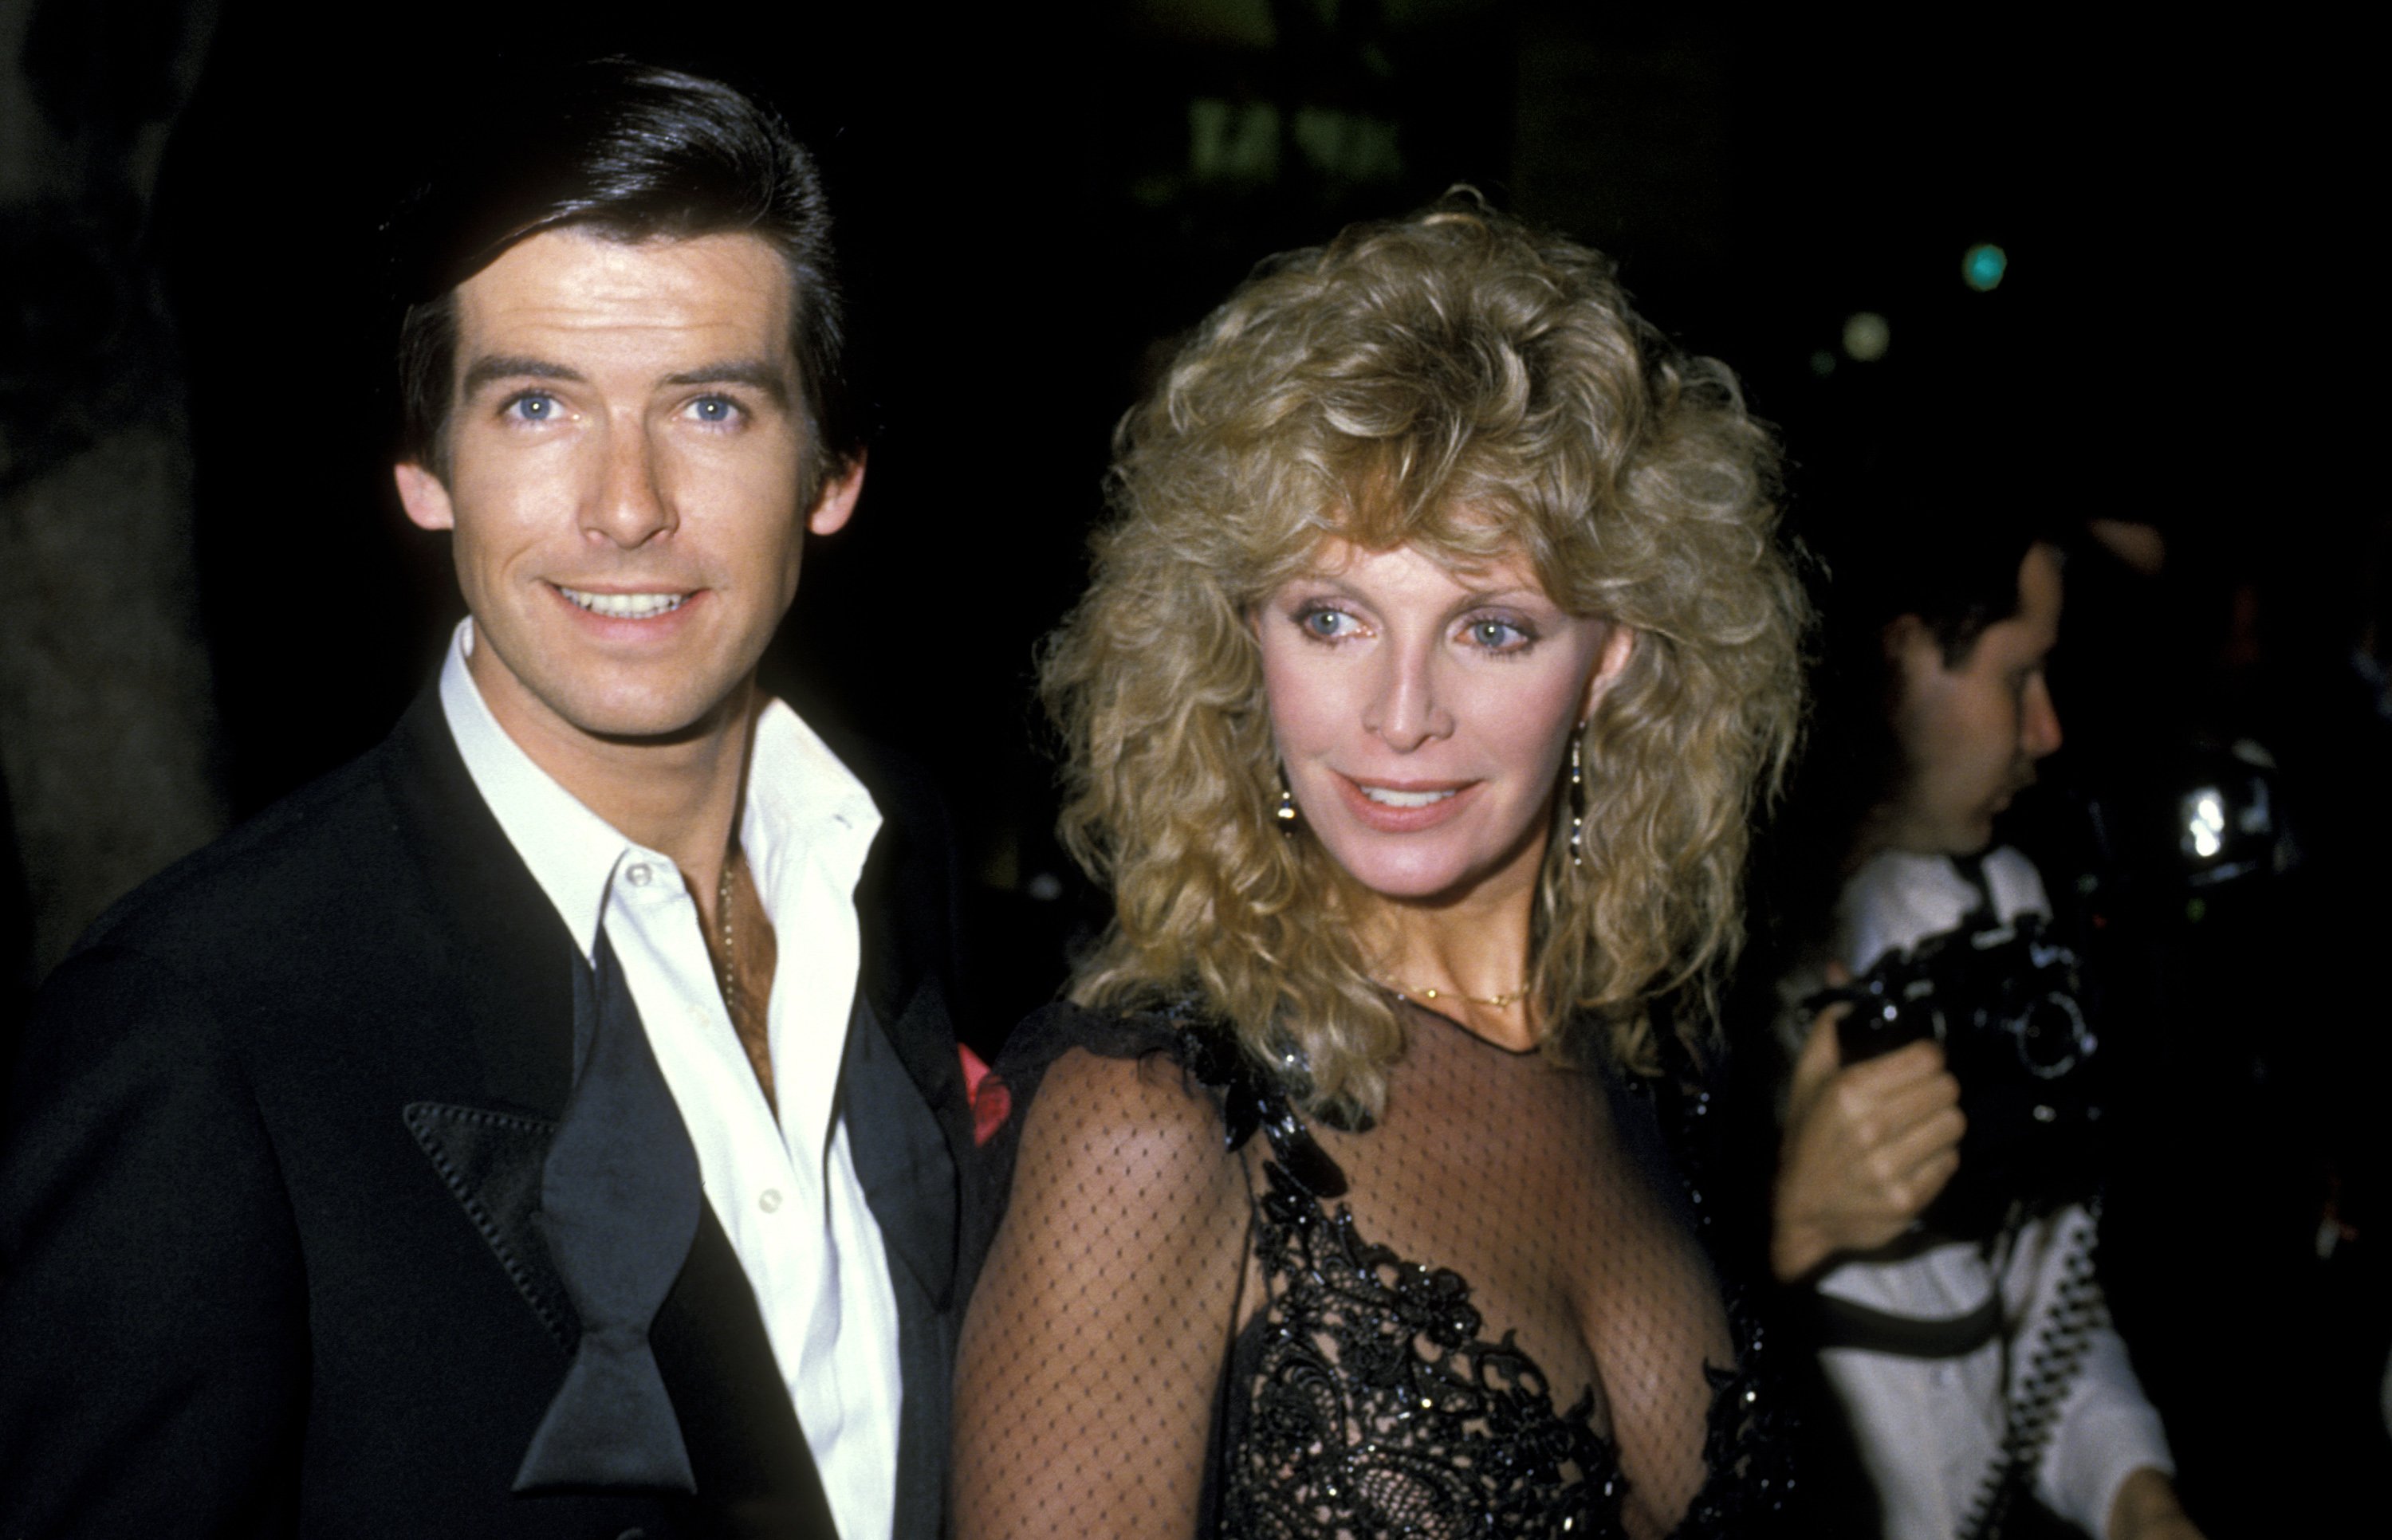 Pierce Brosnan and his wife Cassandra Harris | Source: Getty Images